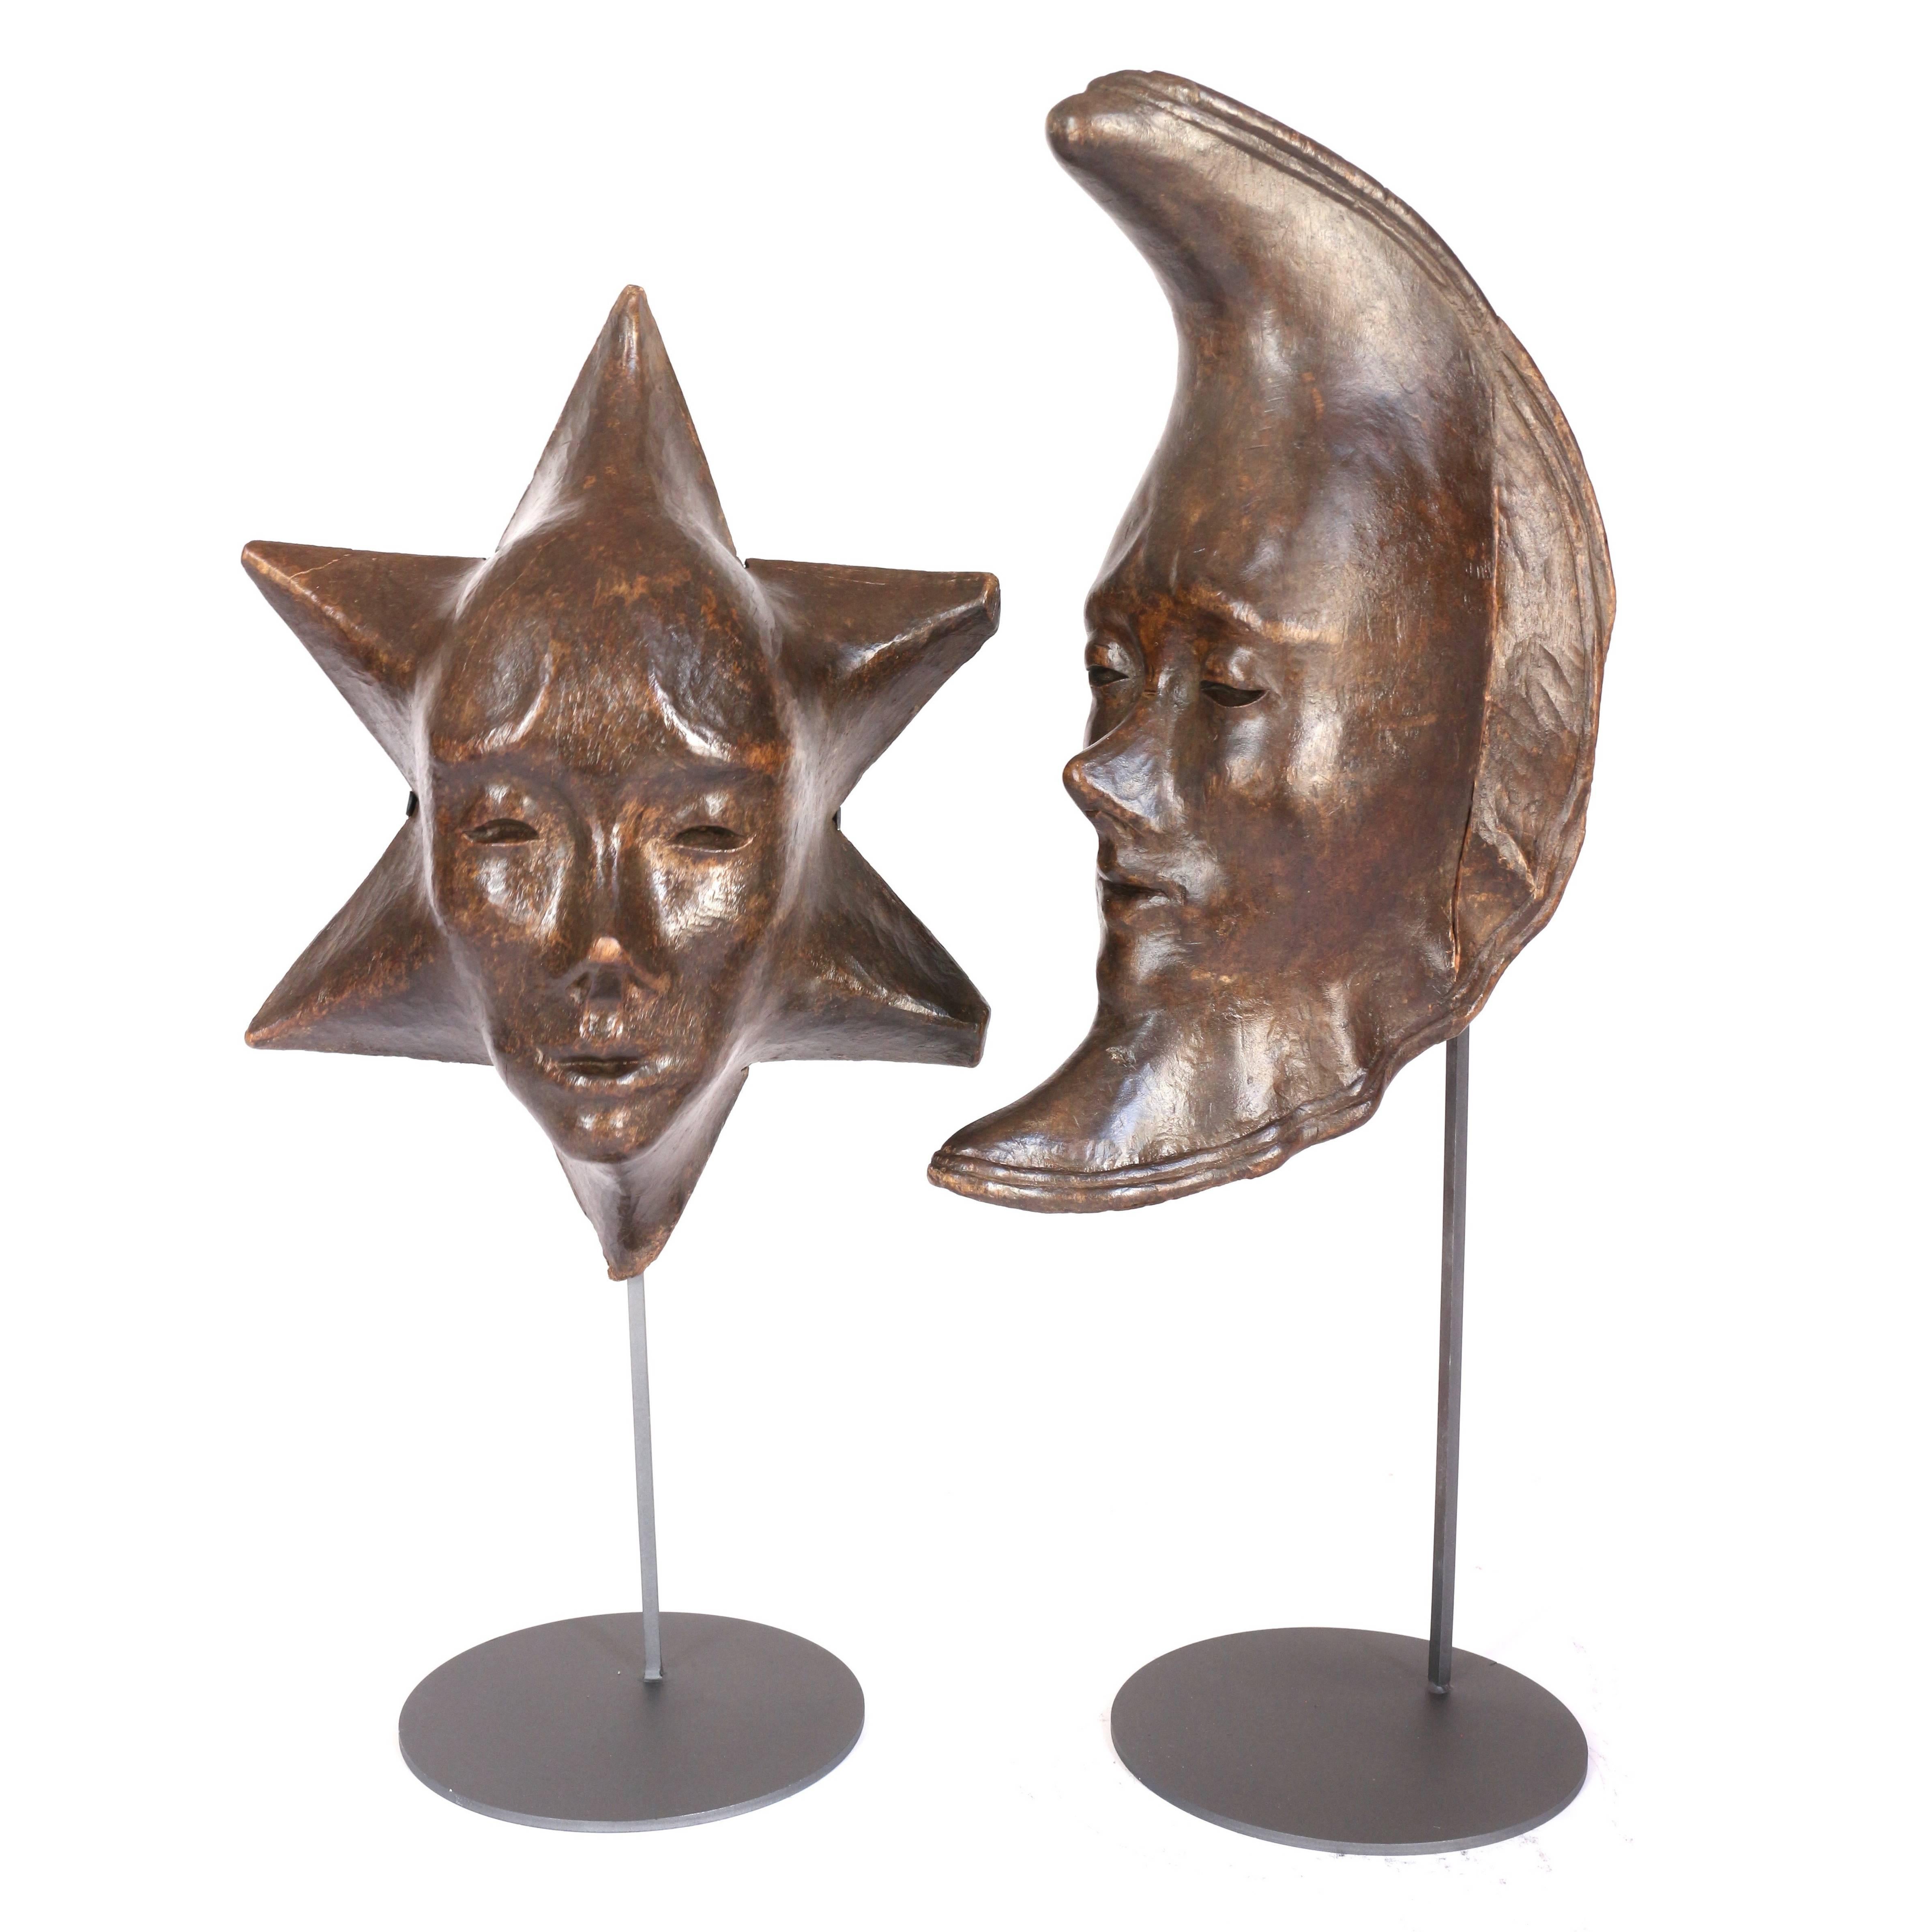 Pair of Late 19th Century Wooden Molds for Creating the Venetian Masks